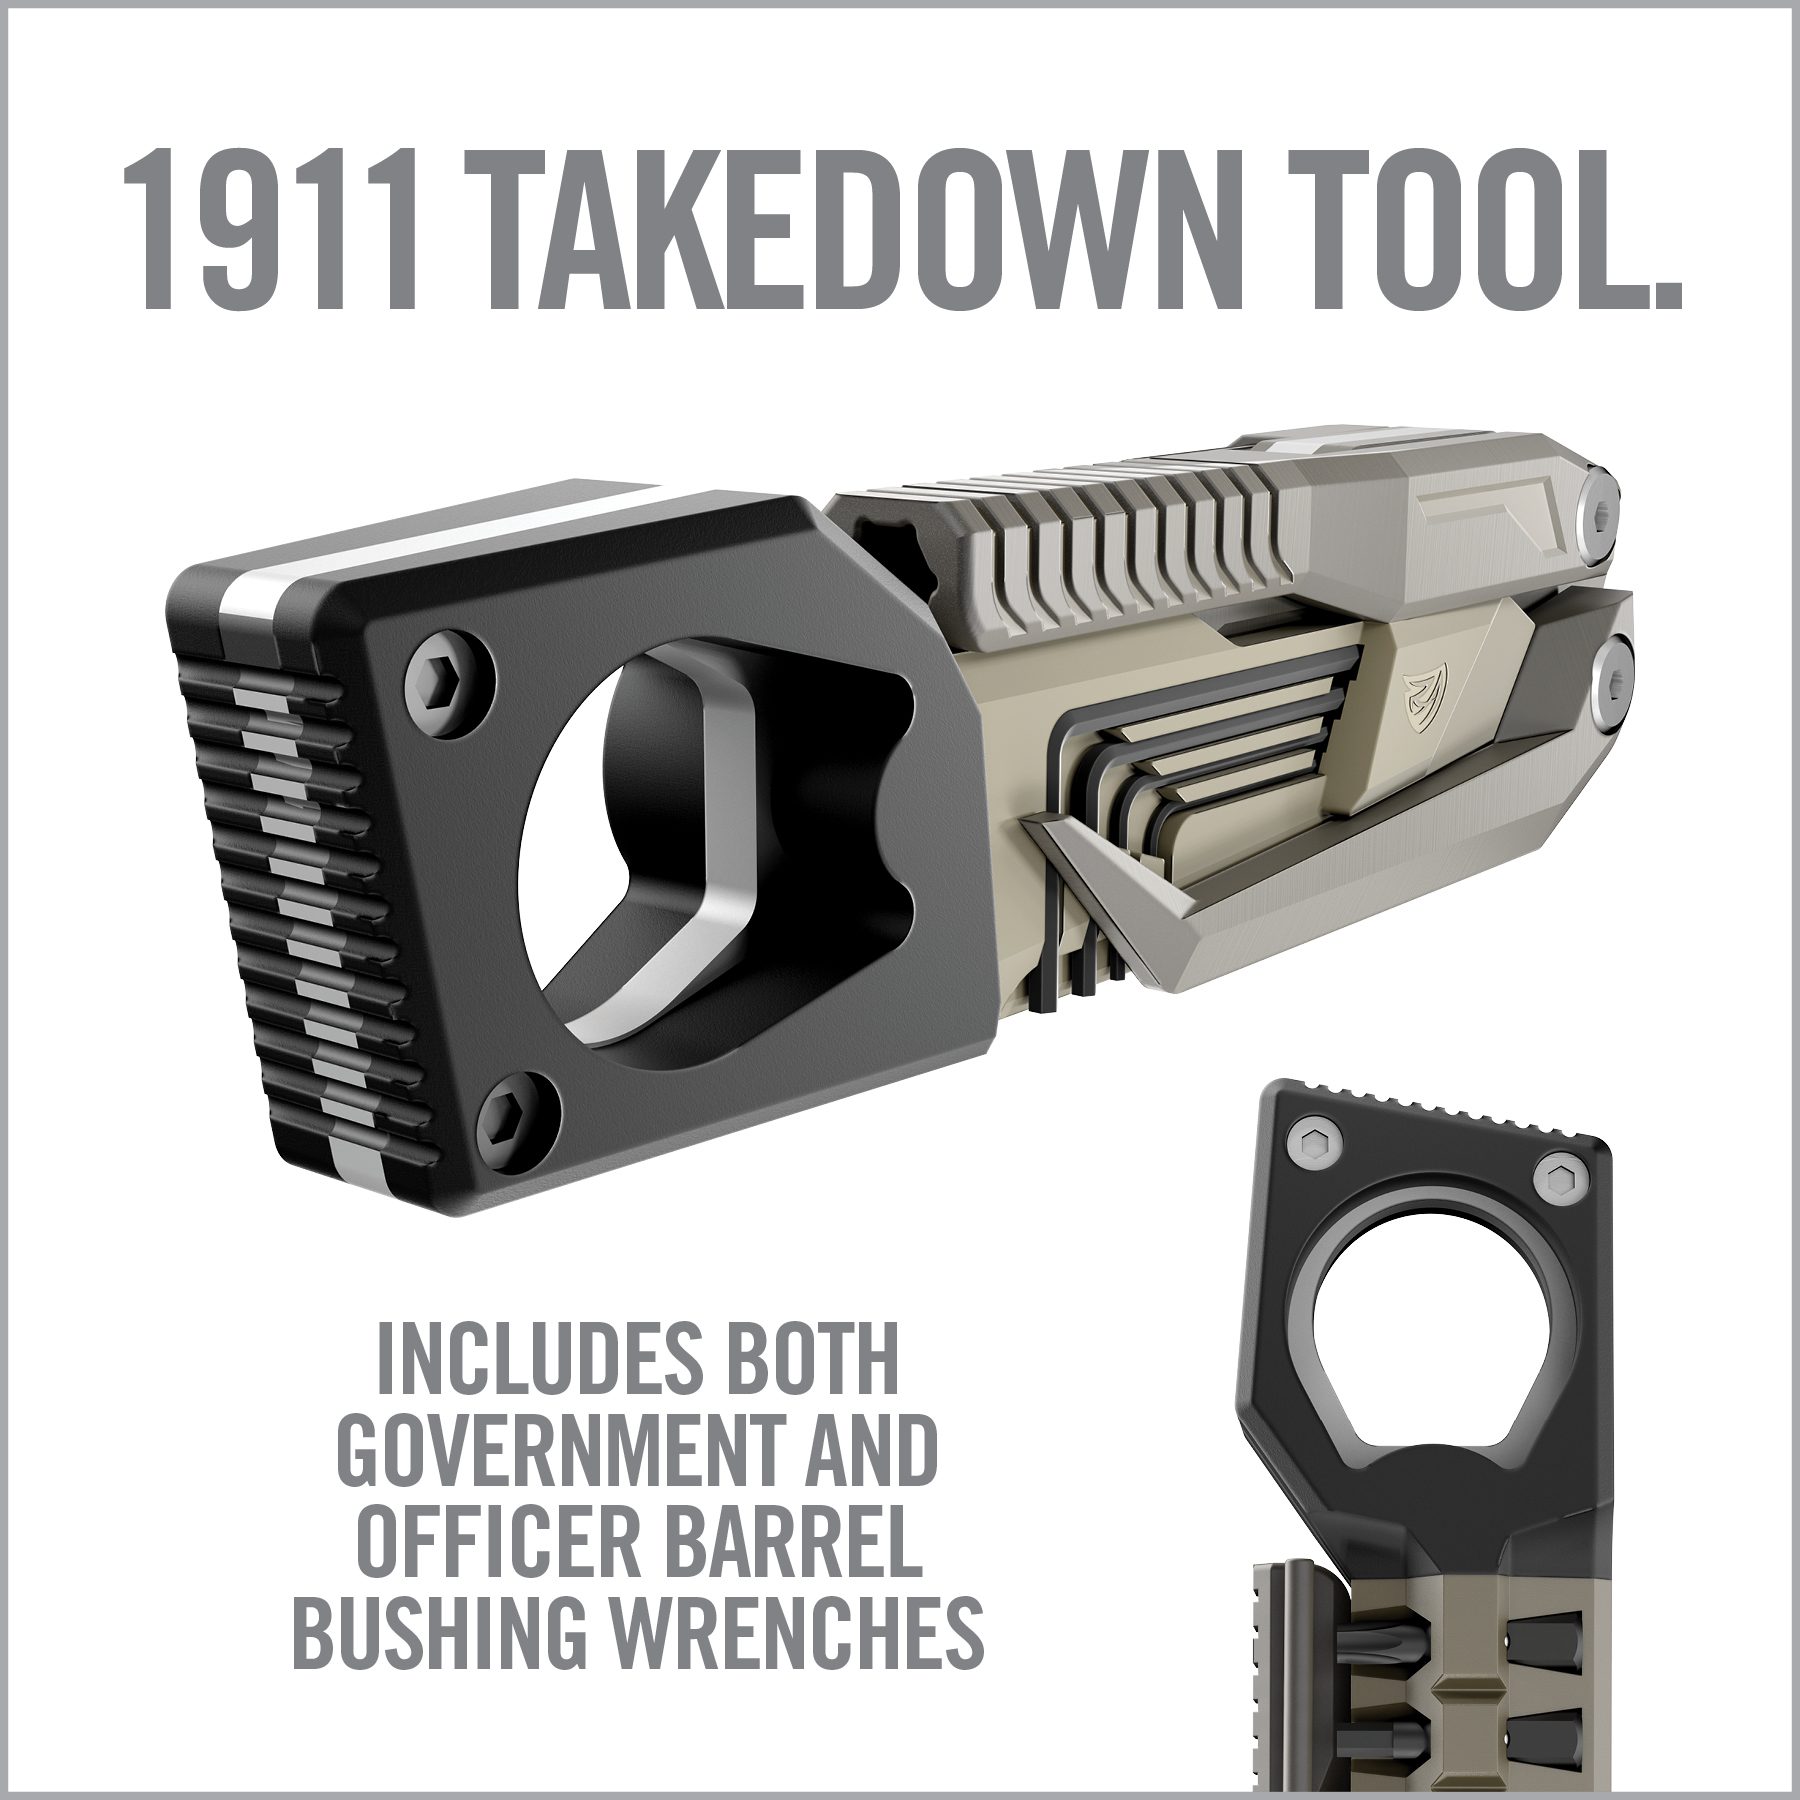 an image of a gun with the words 1911 takedown tool